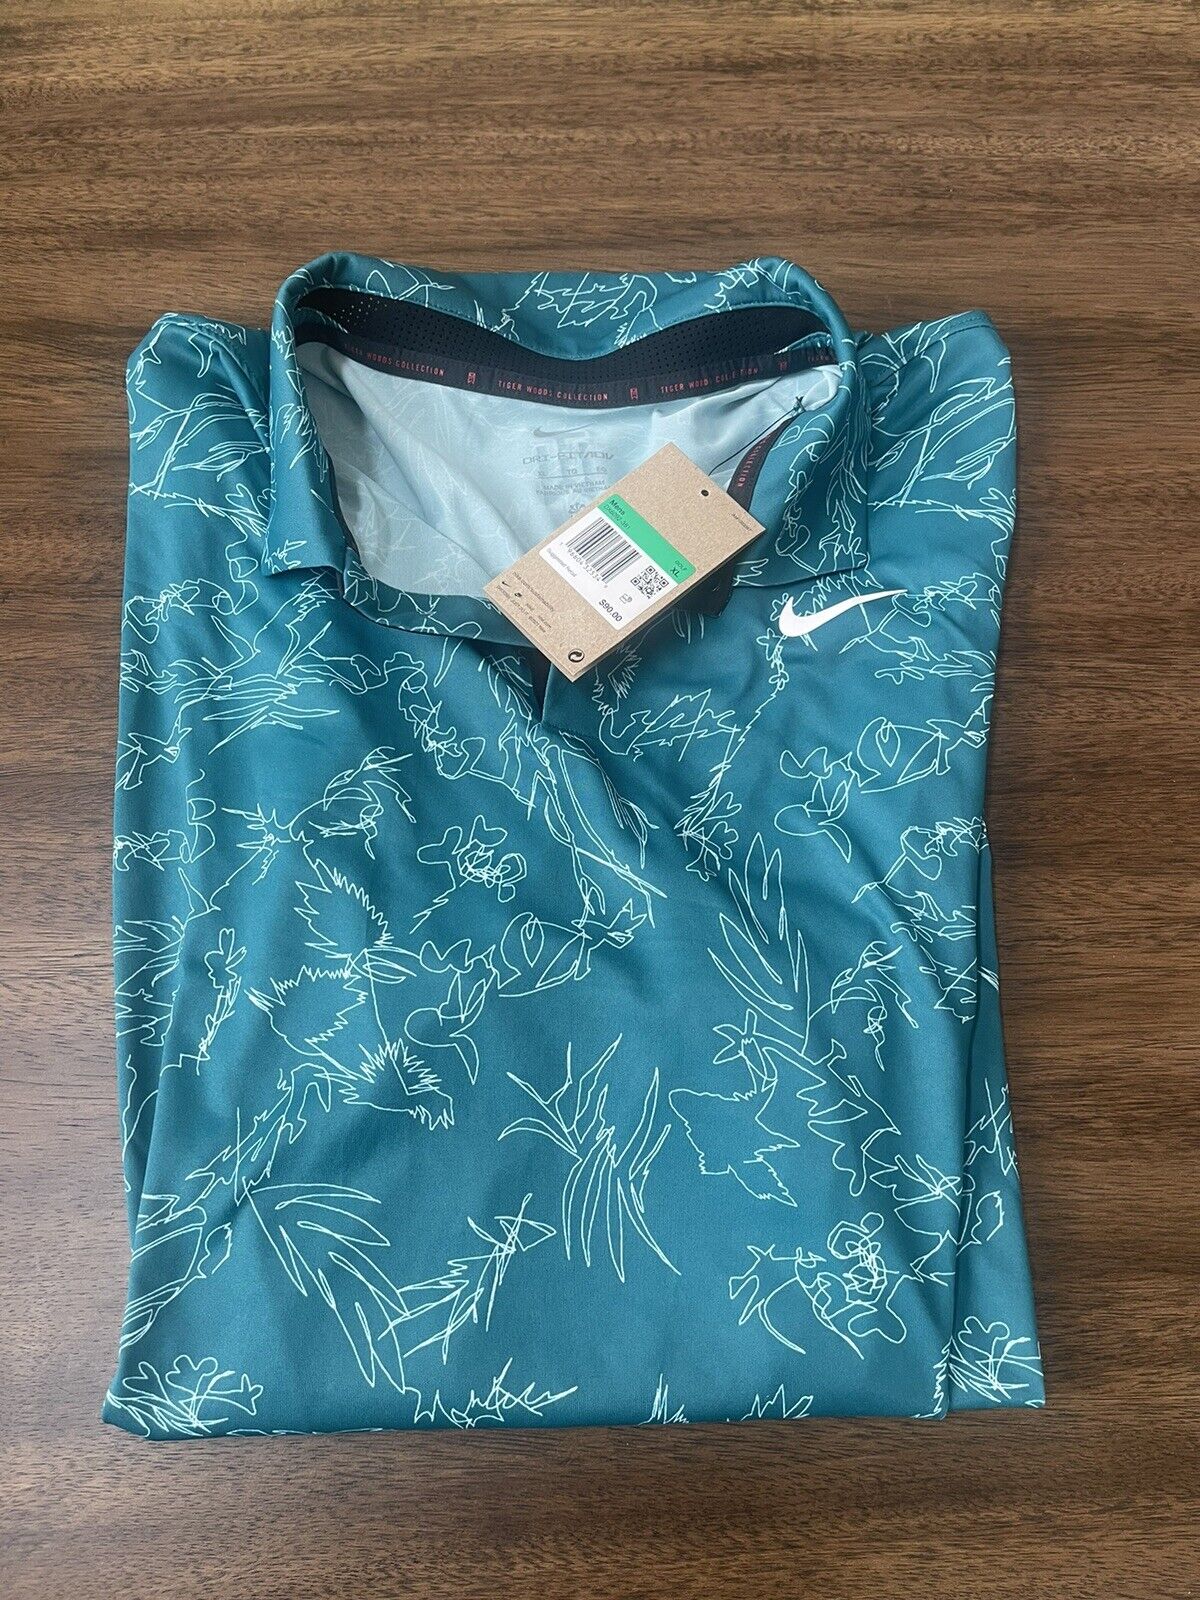 NWT - Nike Tiger Woods Dri-FIT ADV Golf Polo Geode Teal - Men’s Size XL